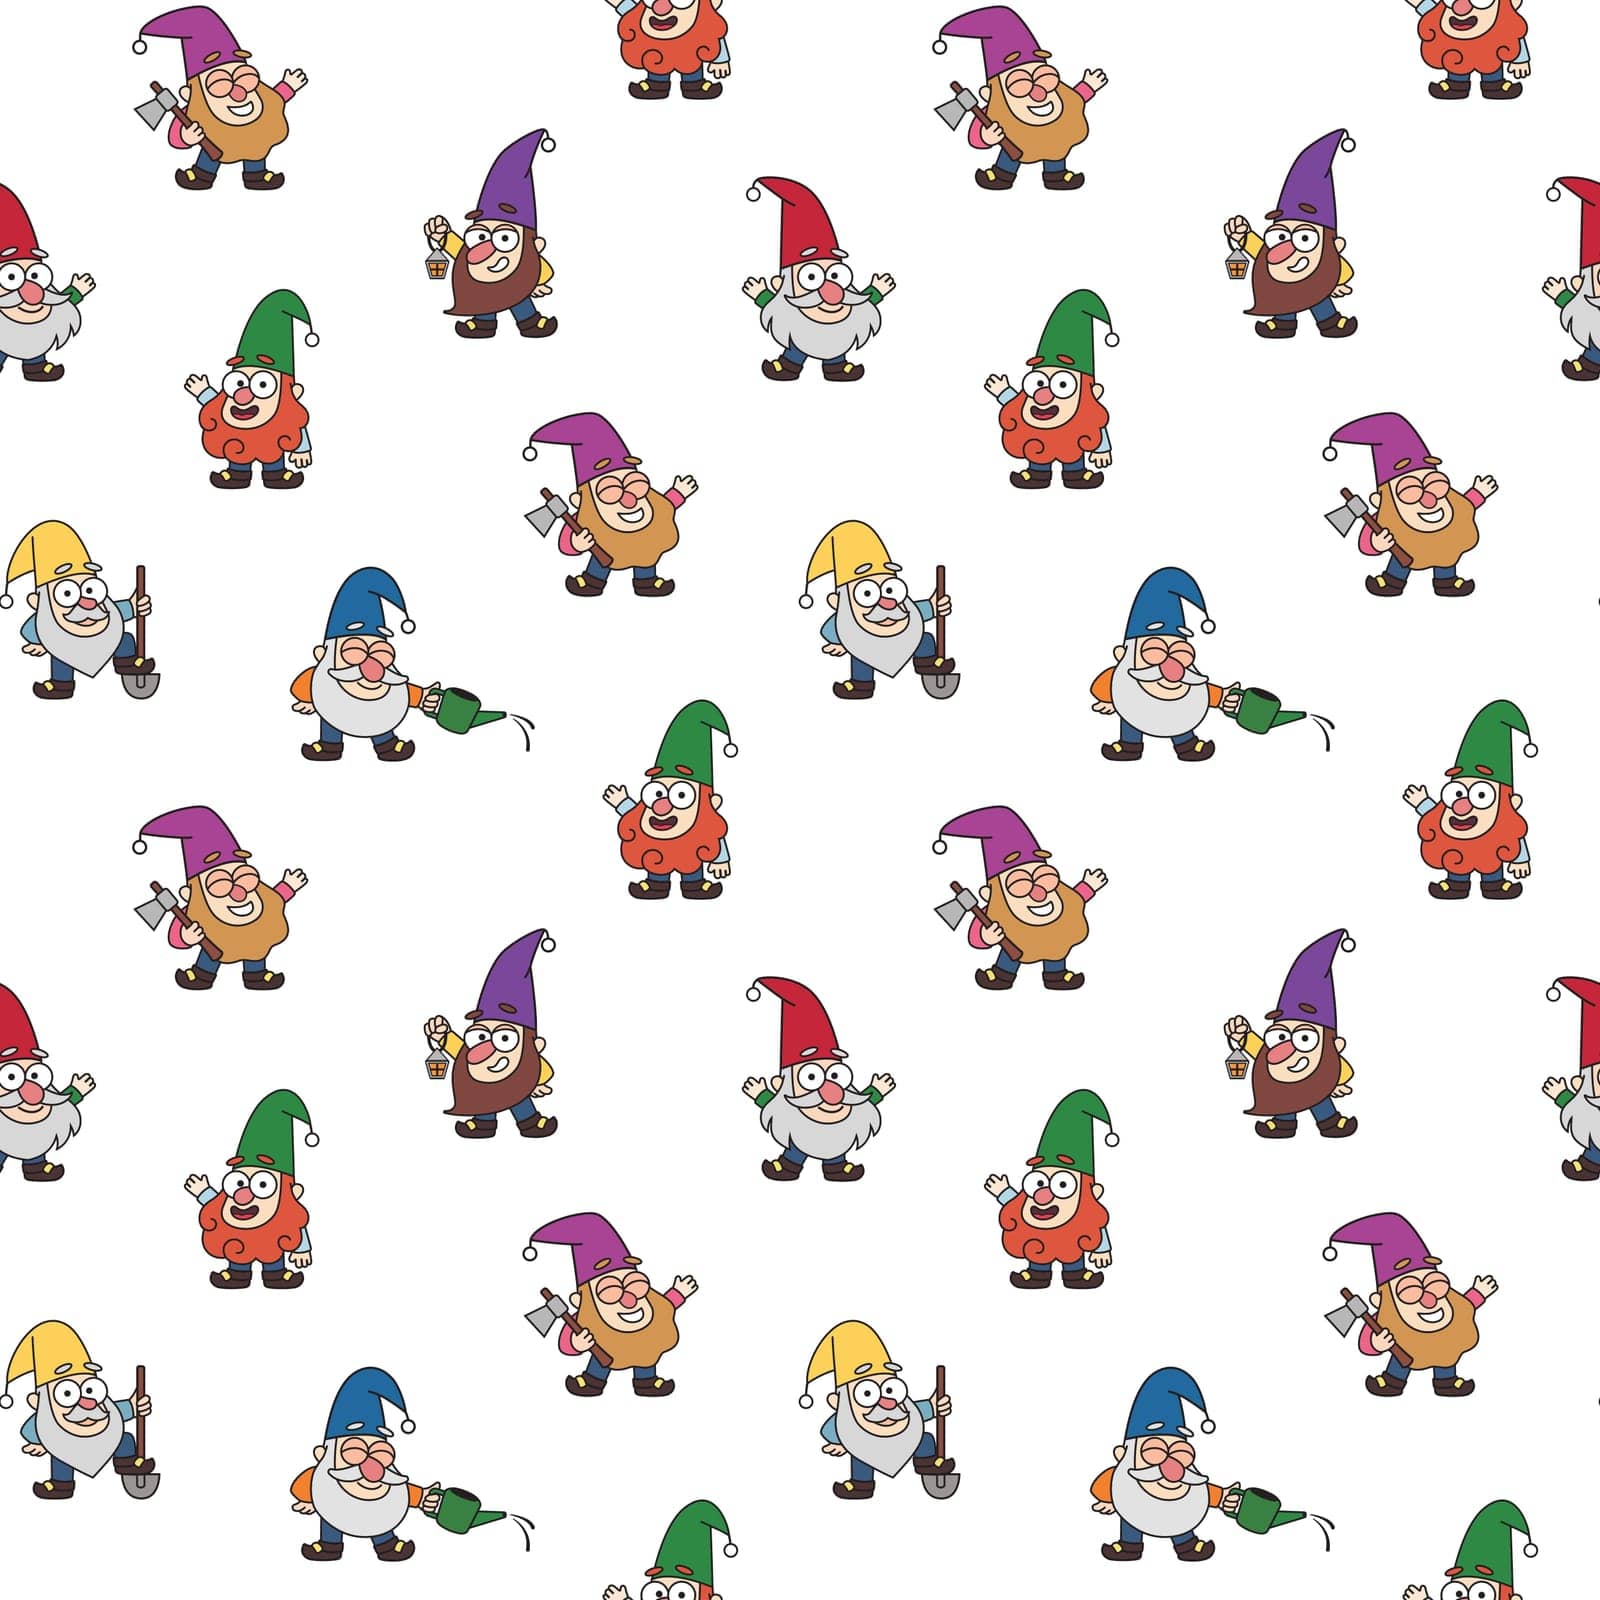 Garden gnomes seamless pattern. Cheerful little garden gnomes, dwarfs, gardeners fabric print in cartoon style. Colorful vector fairytale kids illustration, drawing.